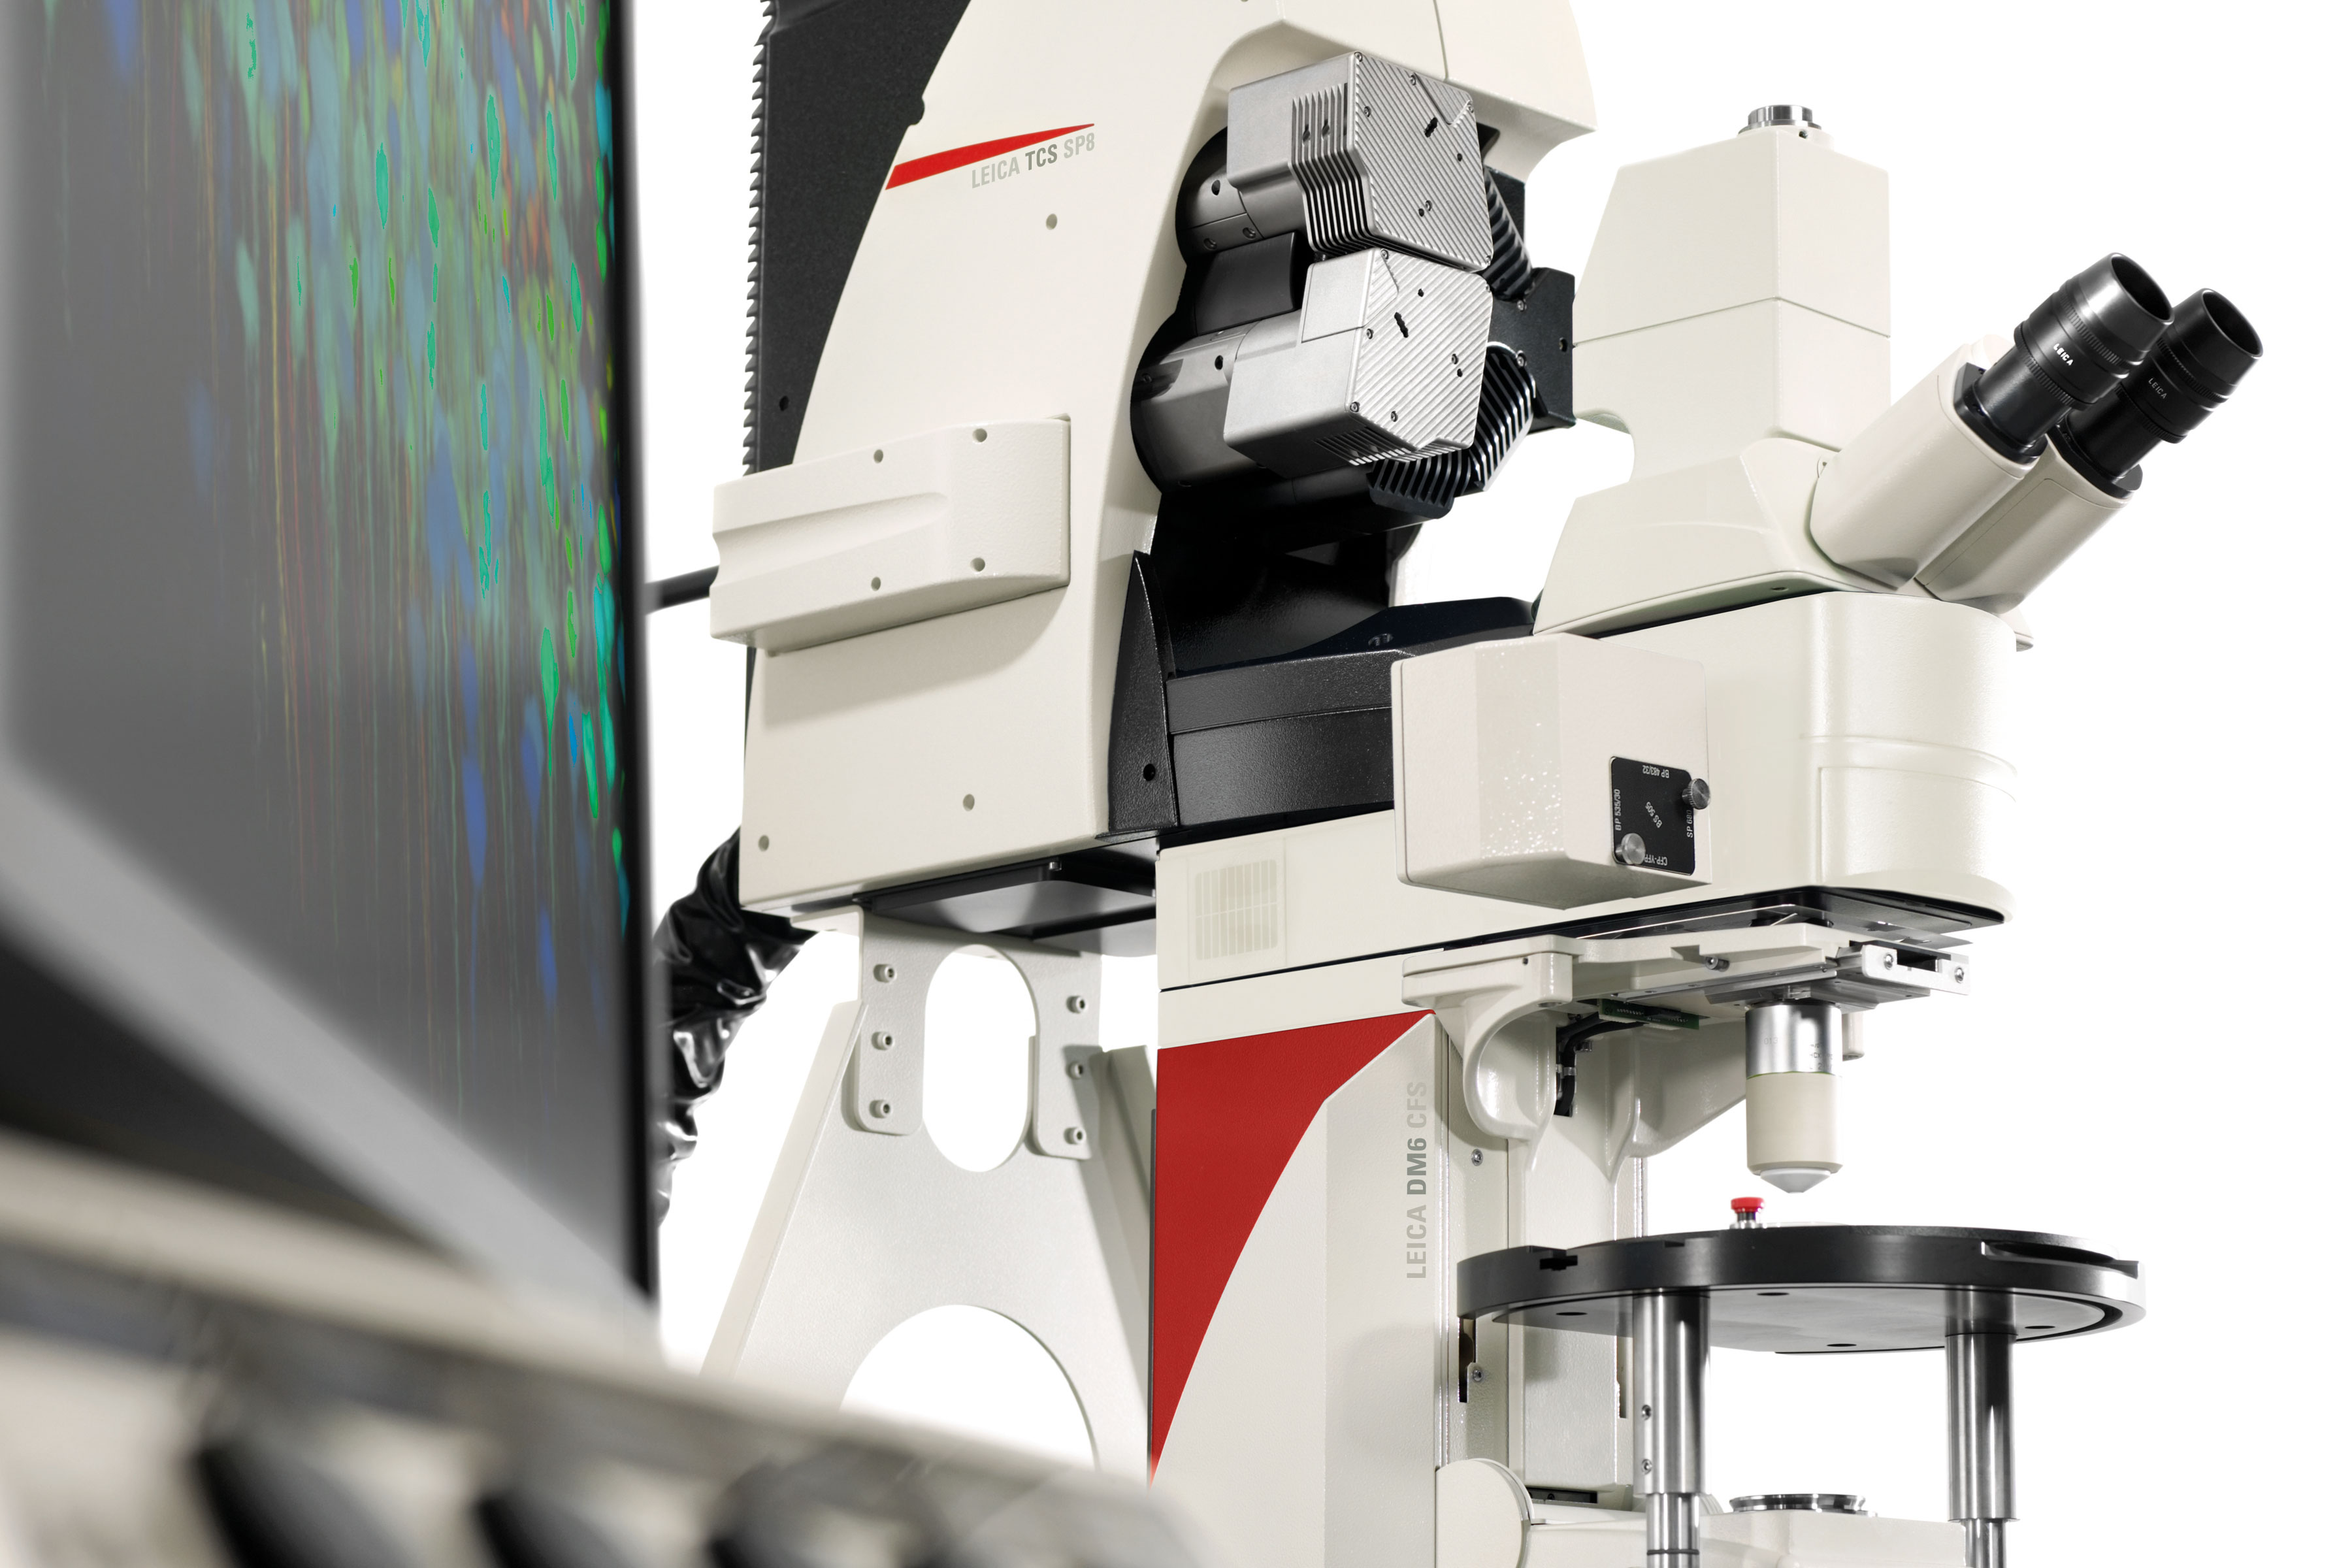 Leica TCS SP8 MP Multiphoton Microscope with IR Laser and OPO